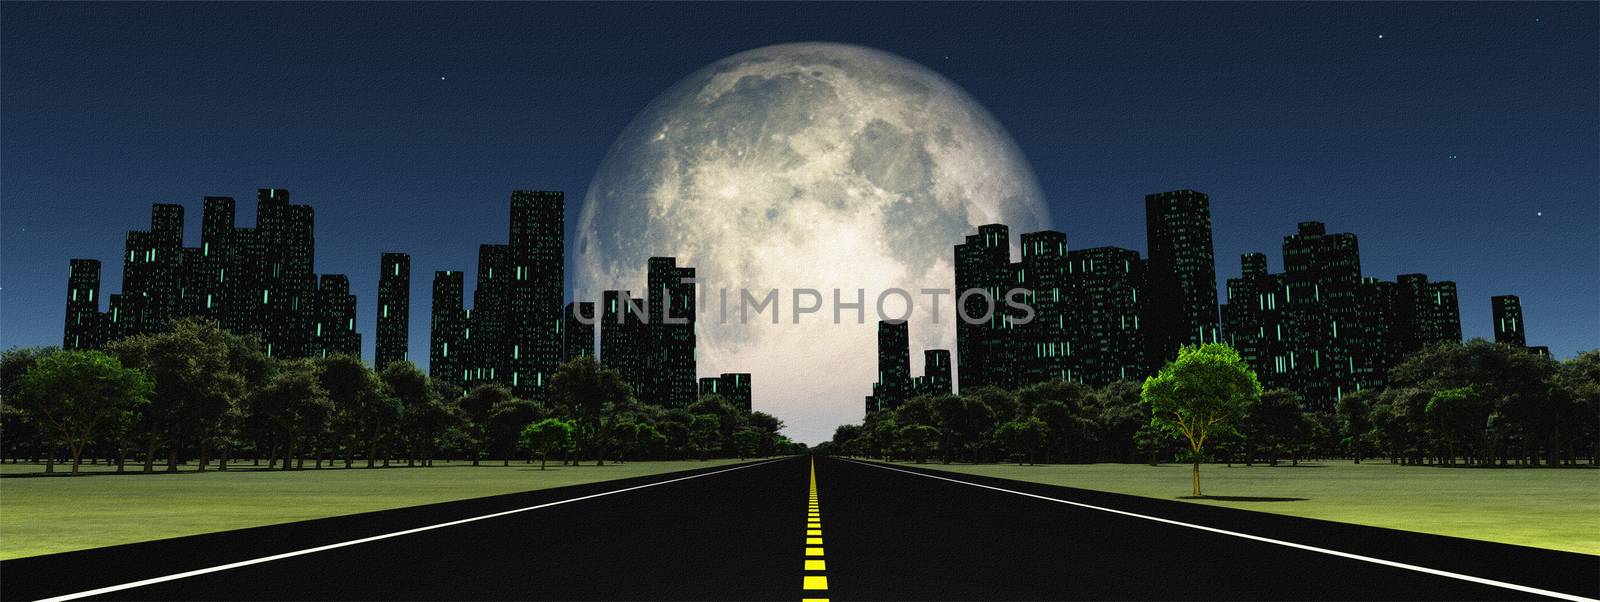 Surreal digital art. Road to the city. Giant moon at the horizon.